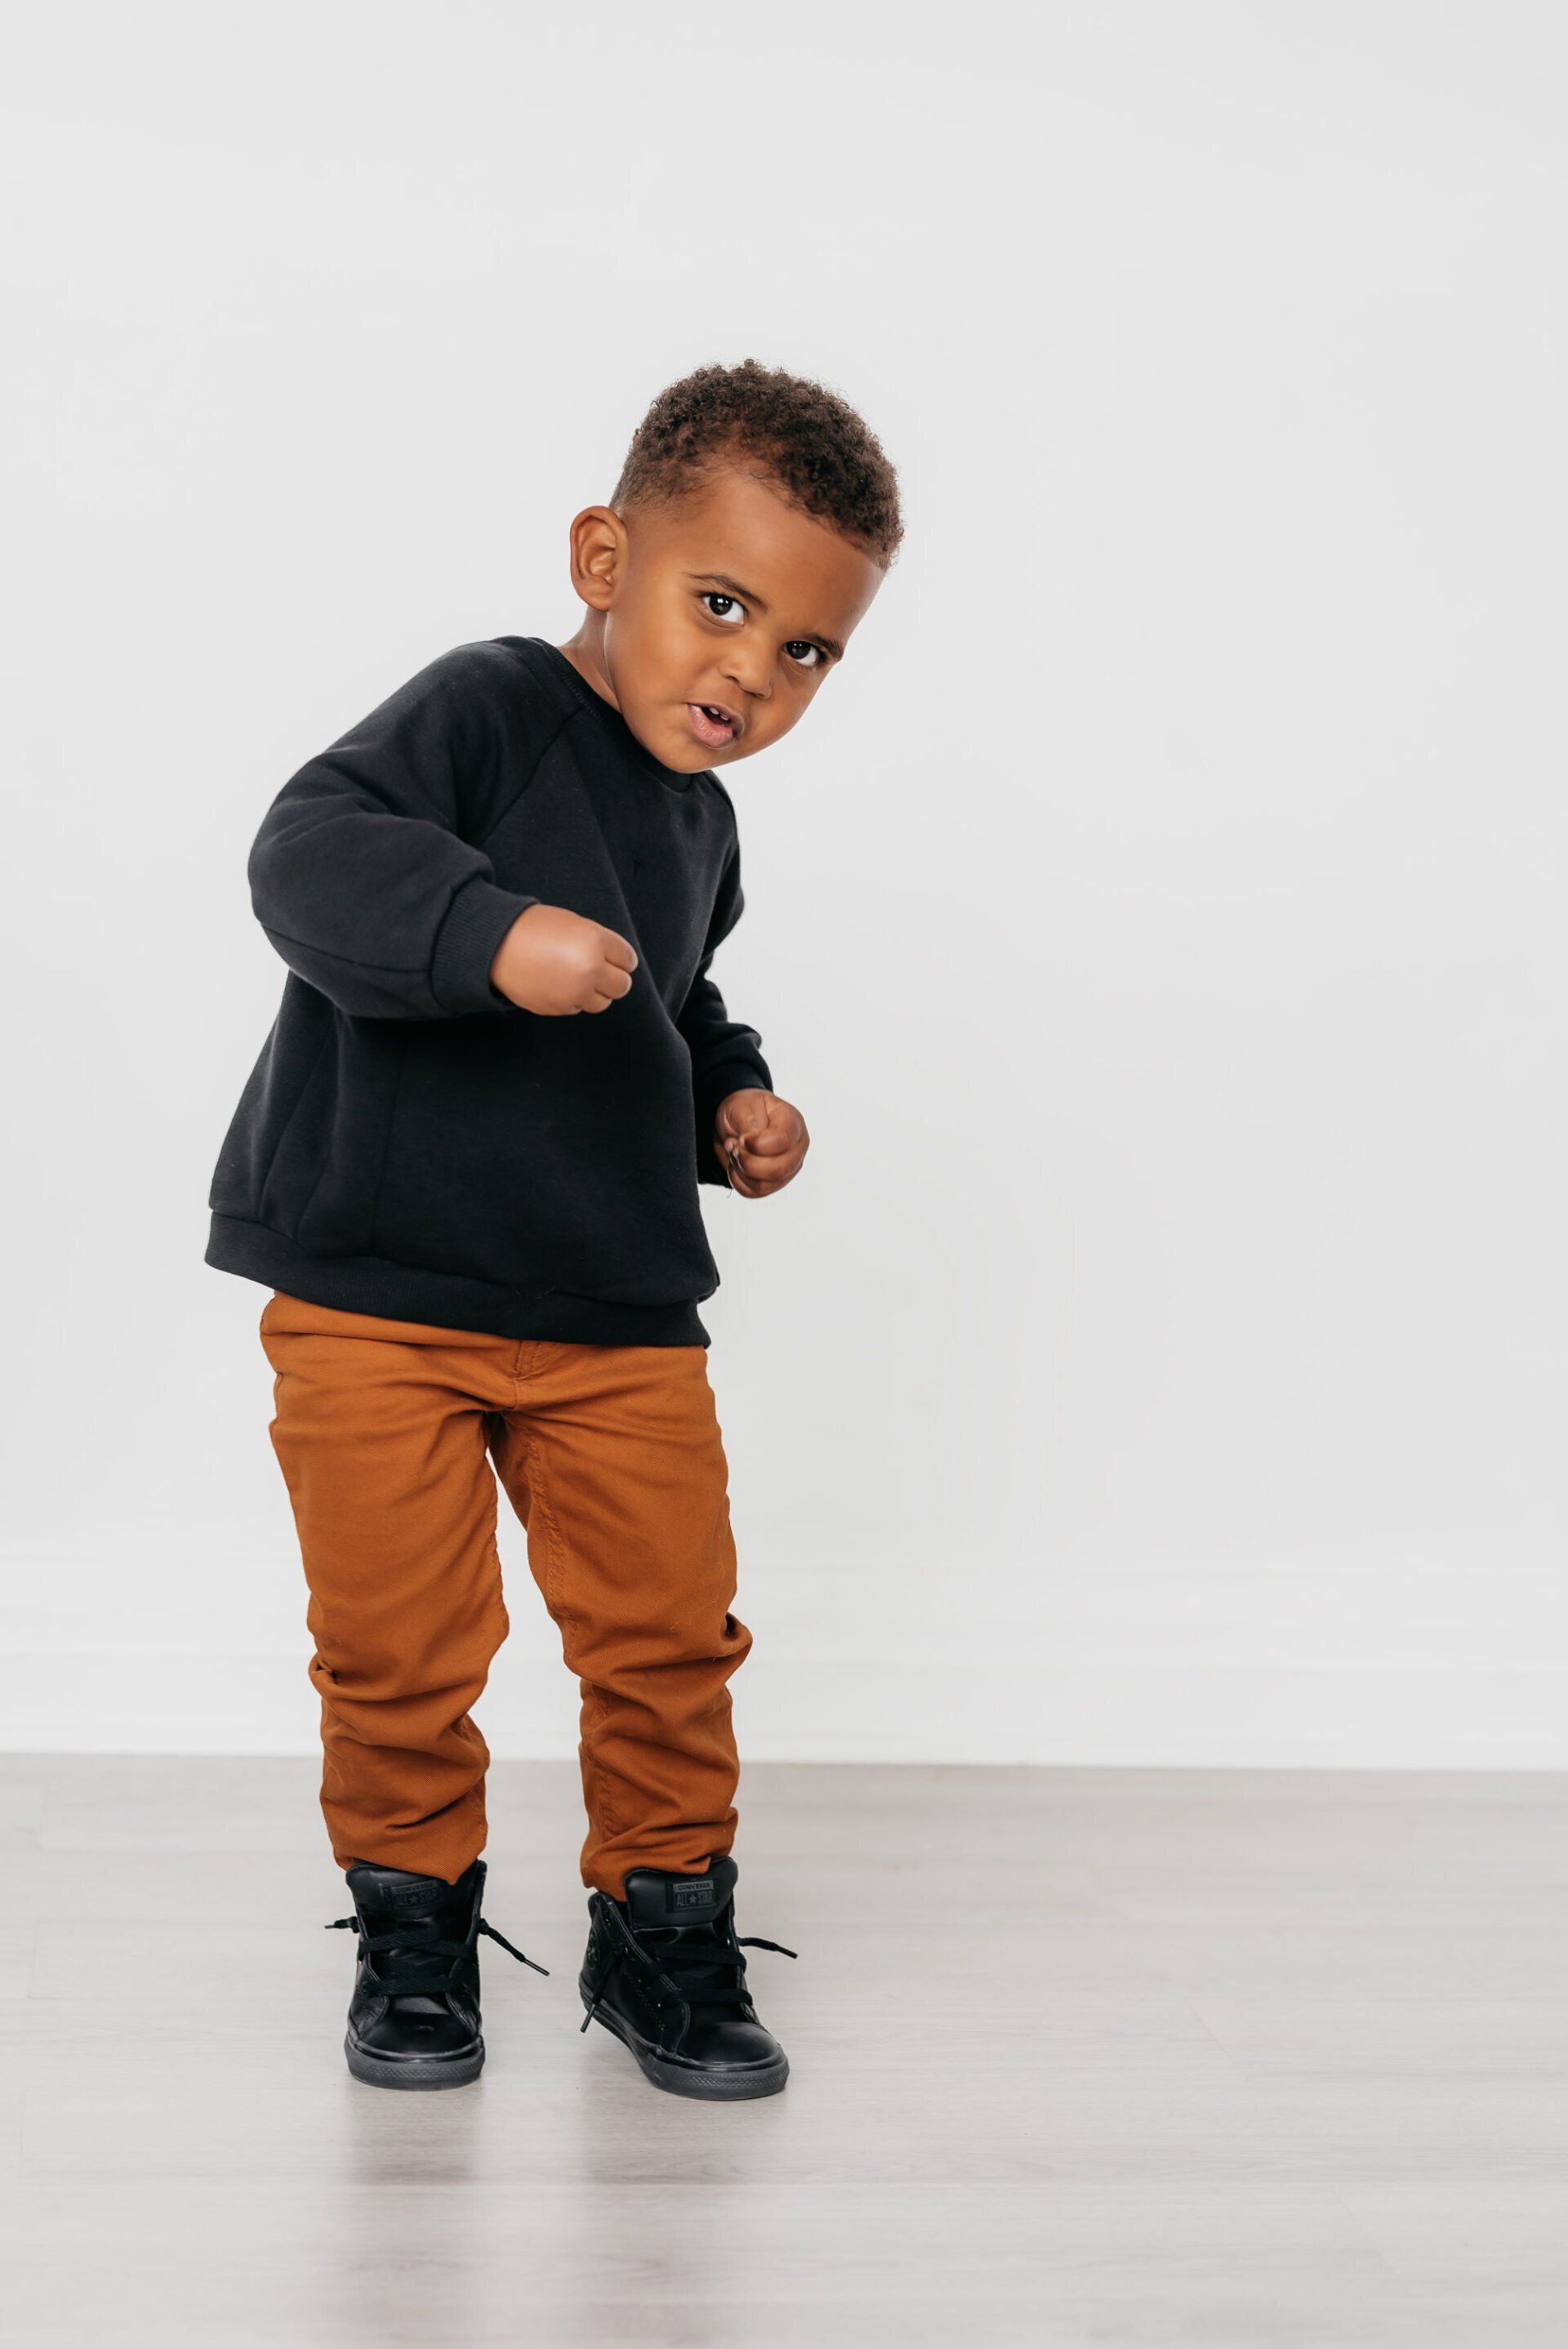 Photo of toddler dancing for family photography